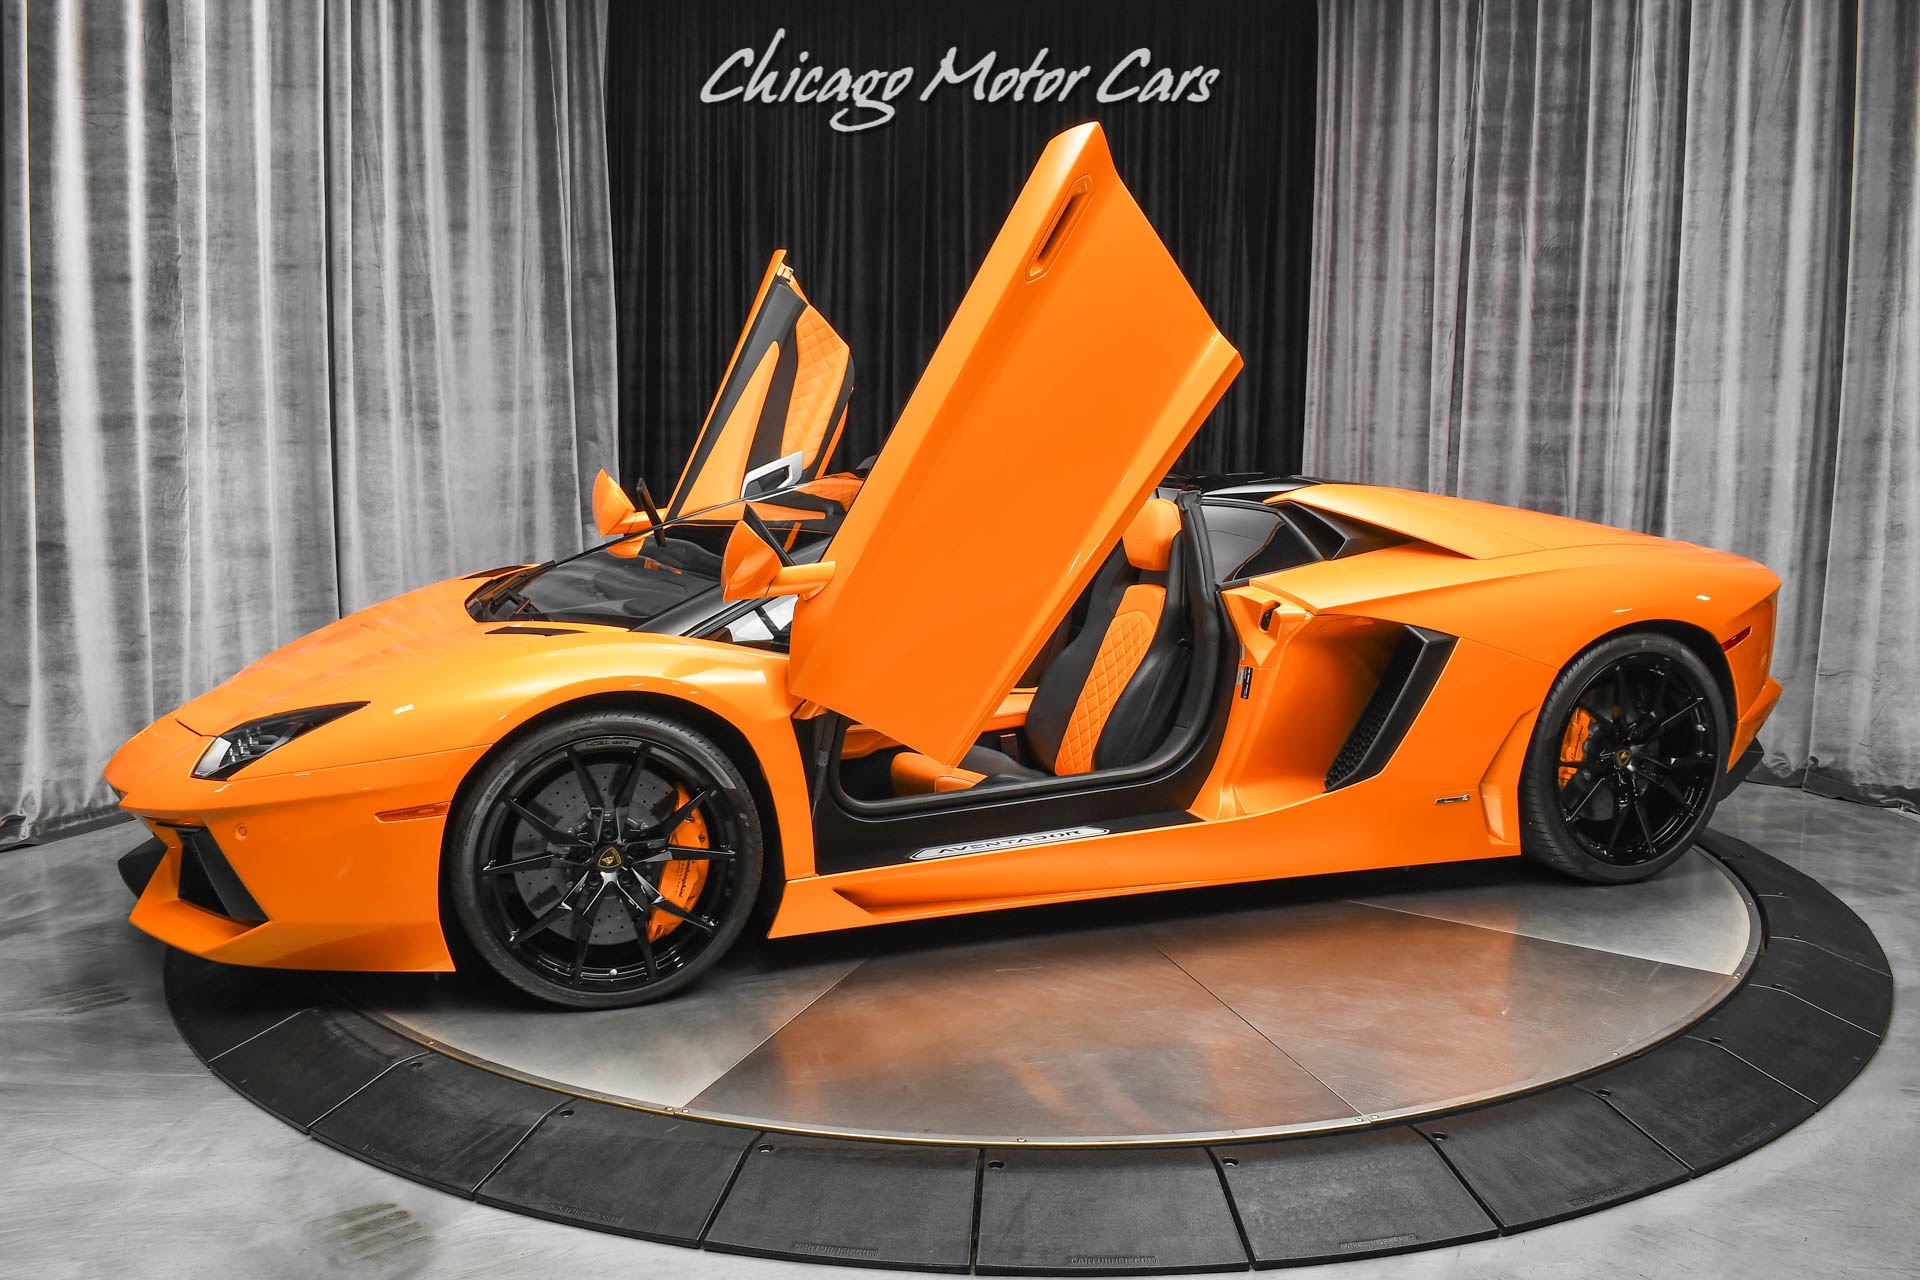 Used 2014 Lamborghini Aventador Roadster Convertible LOW Miles! HOT Color  Combo! Ceramic Coated + Front PPF For Sale (Special Pricing) | Chicago  Motor Cars Stock #19304